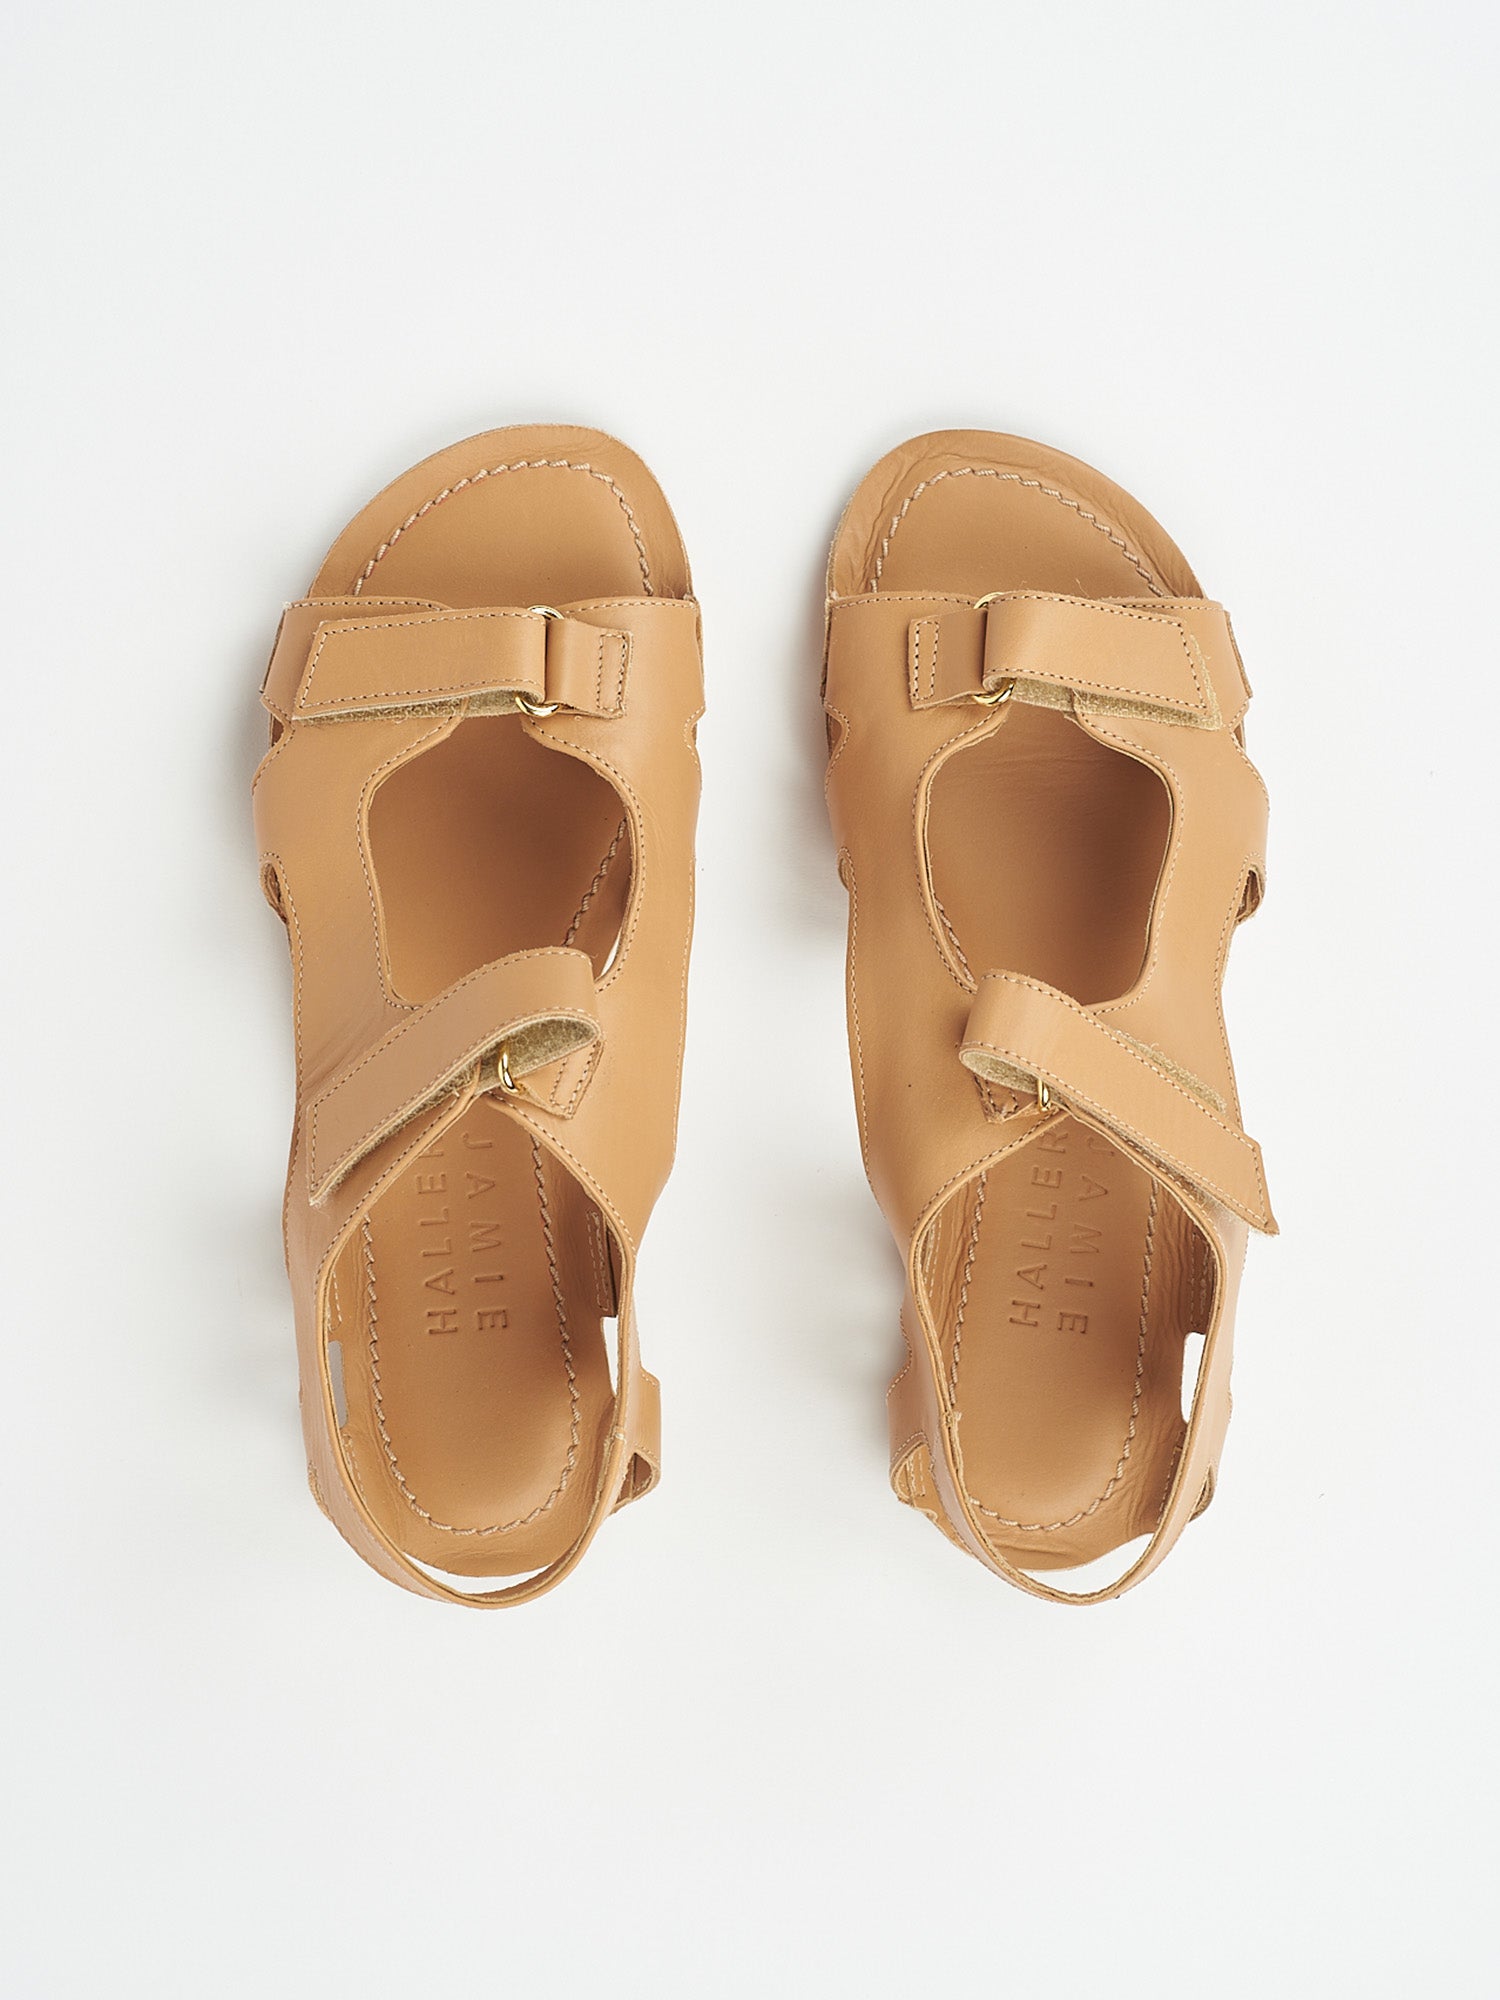 The Walking Sandal in Bare Flat View